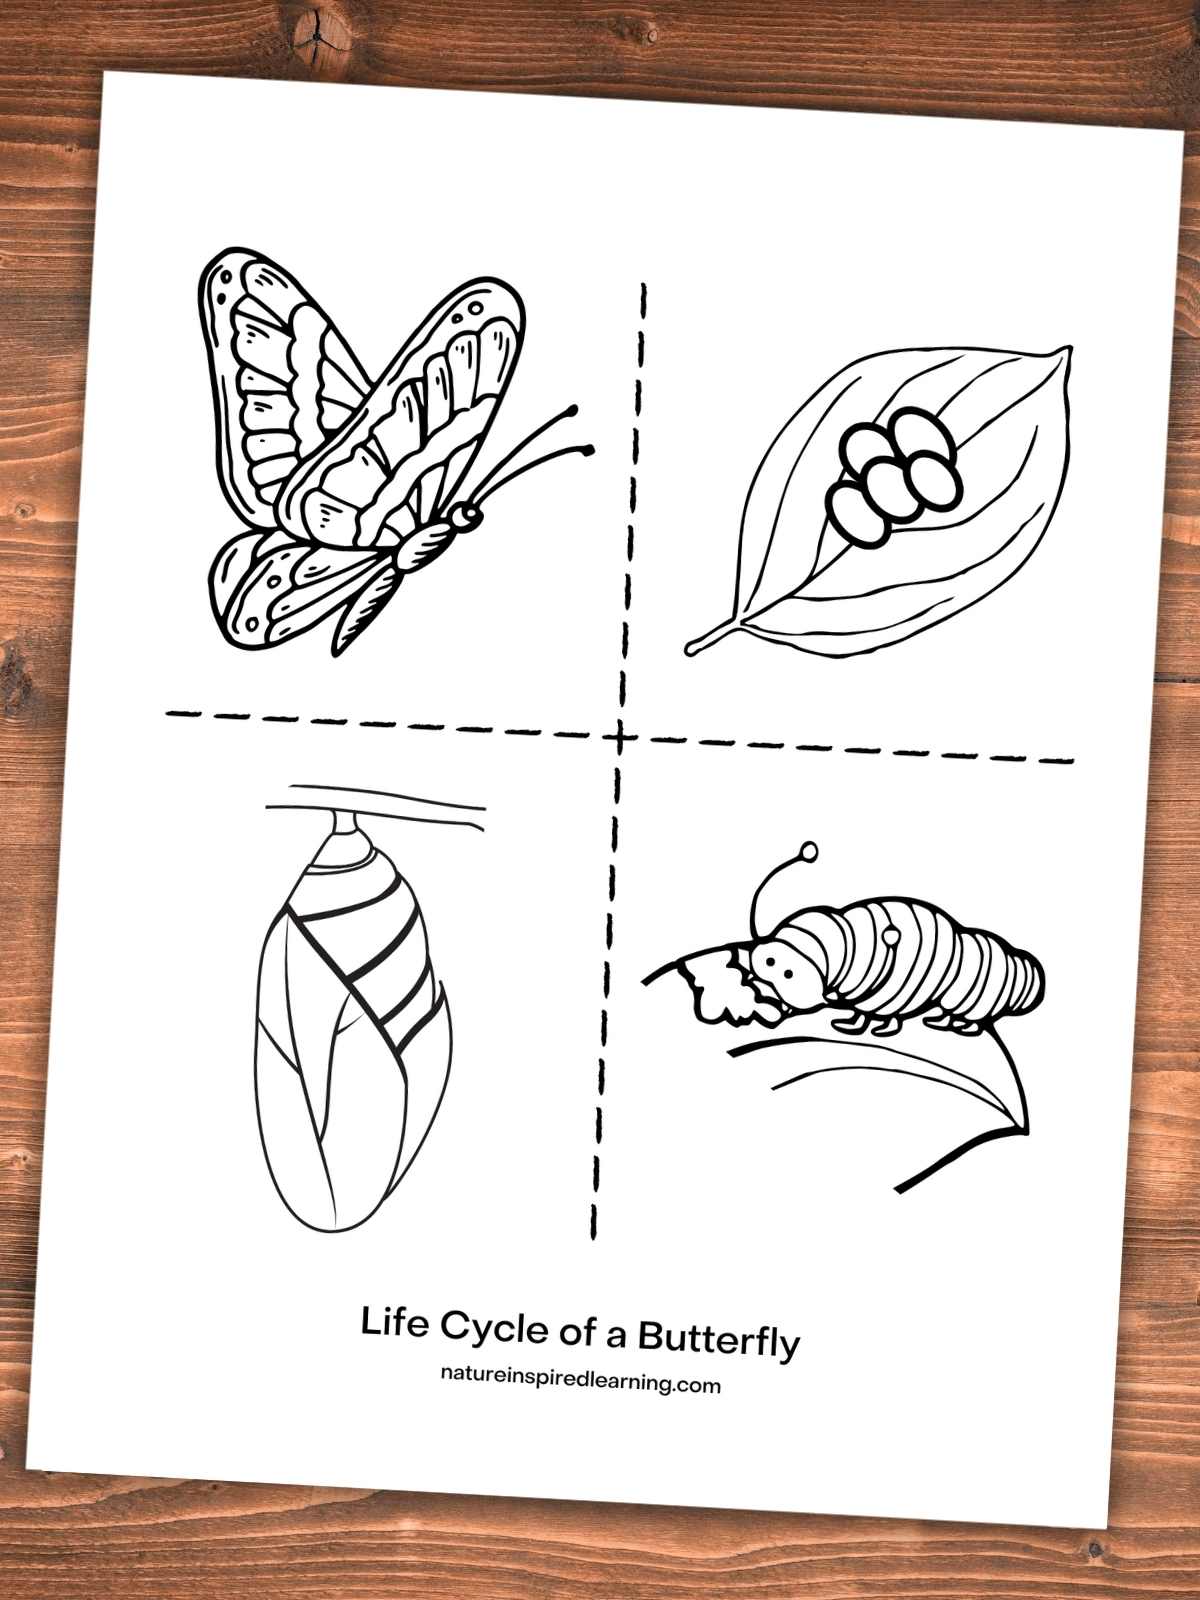 simple life cycle coloring page with a butterfly, eggs on a leaf, caterpillar on a leaf, and chrysalis separated by dashed lines. Printable on a wooden background